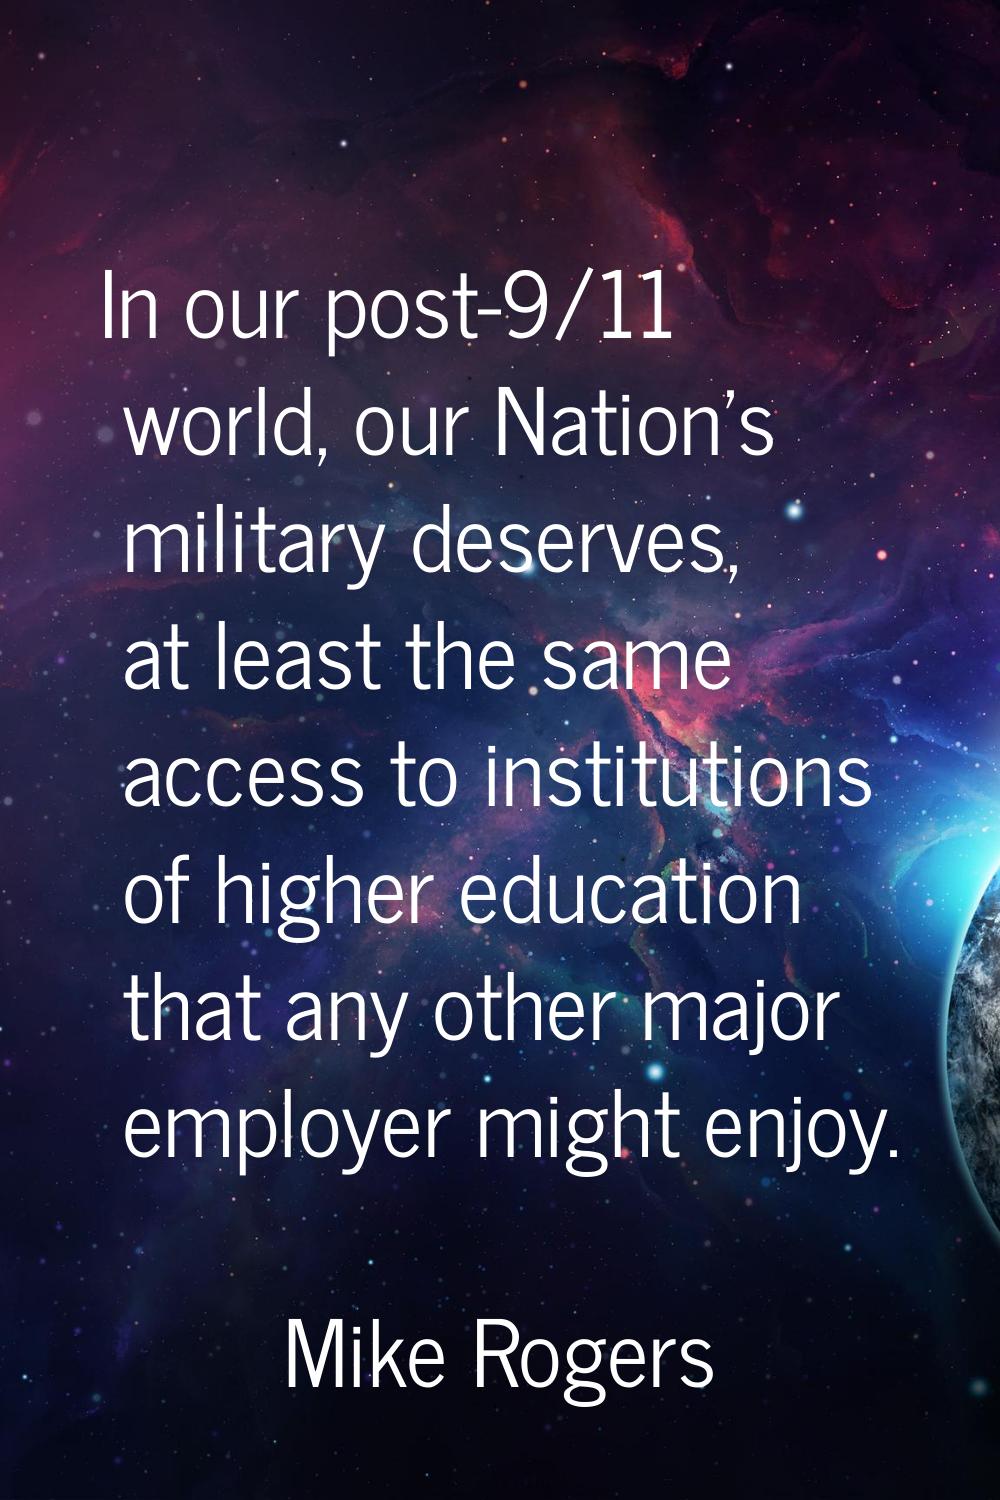 In our post-9/11 world, our Nation's military deserves, at least the same access to institutions of